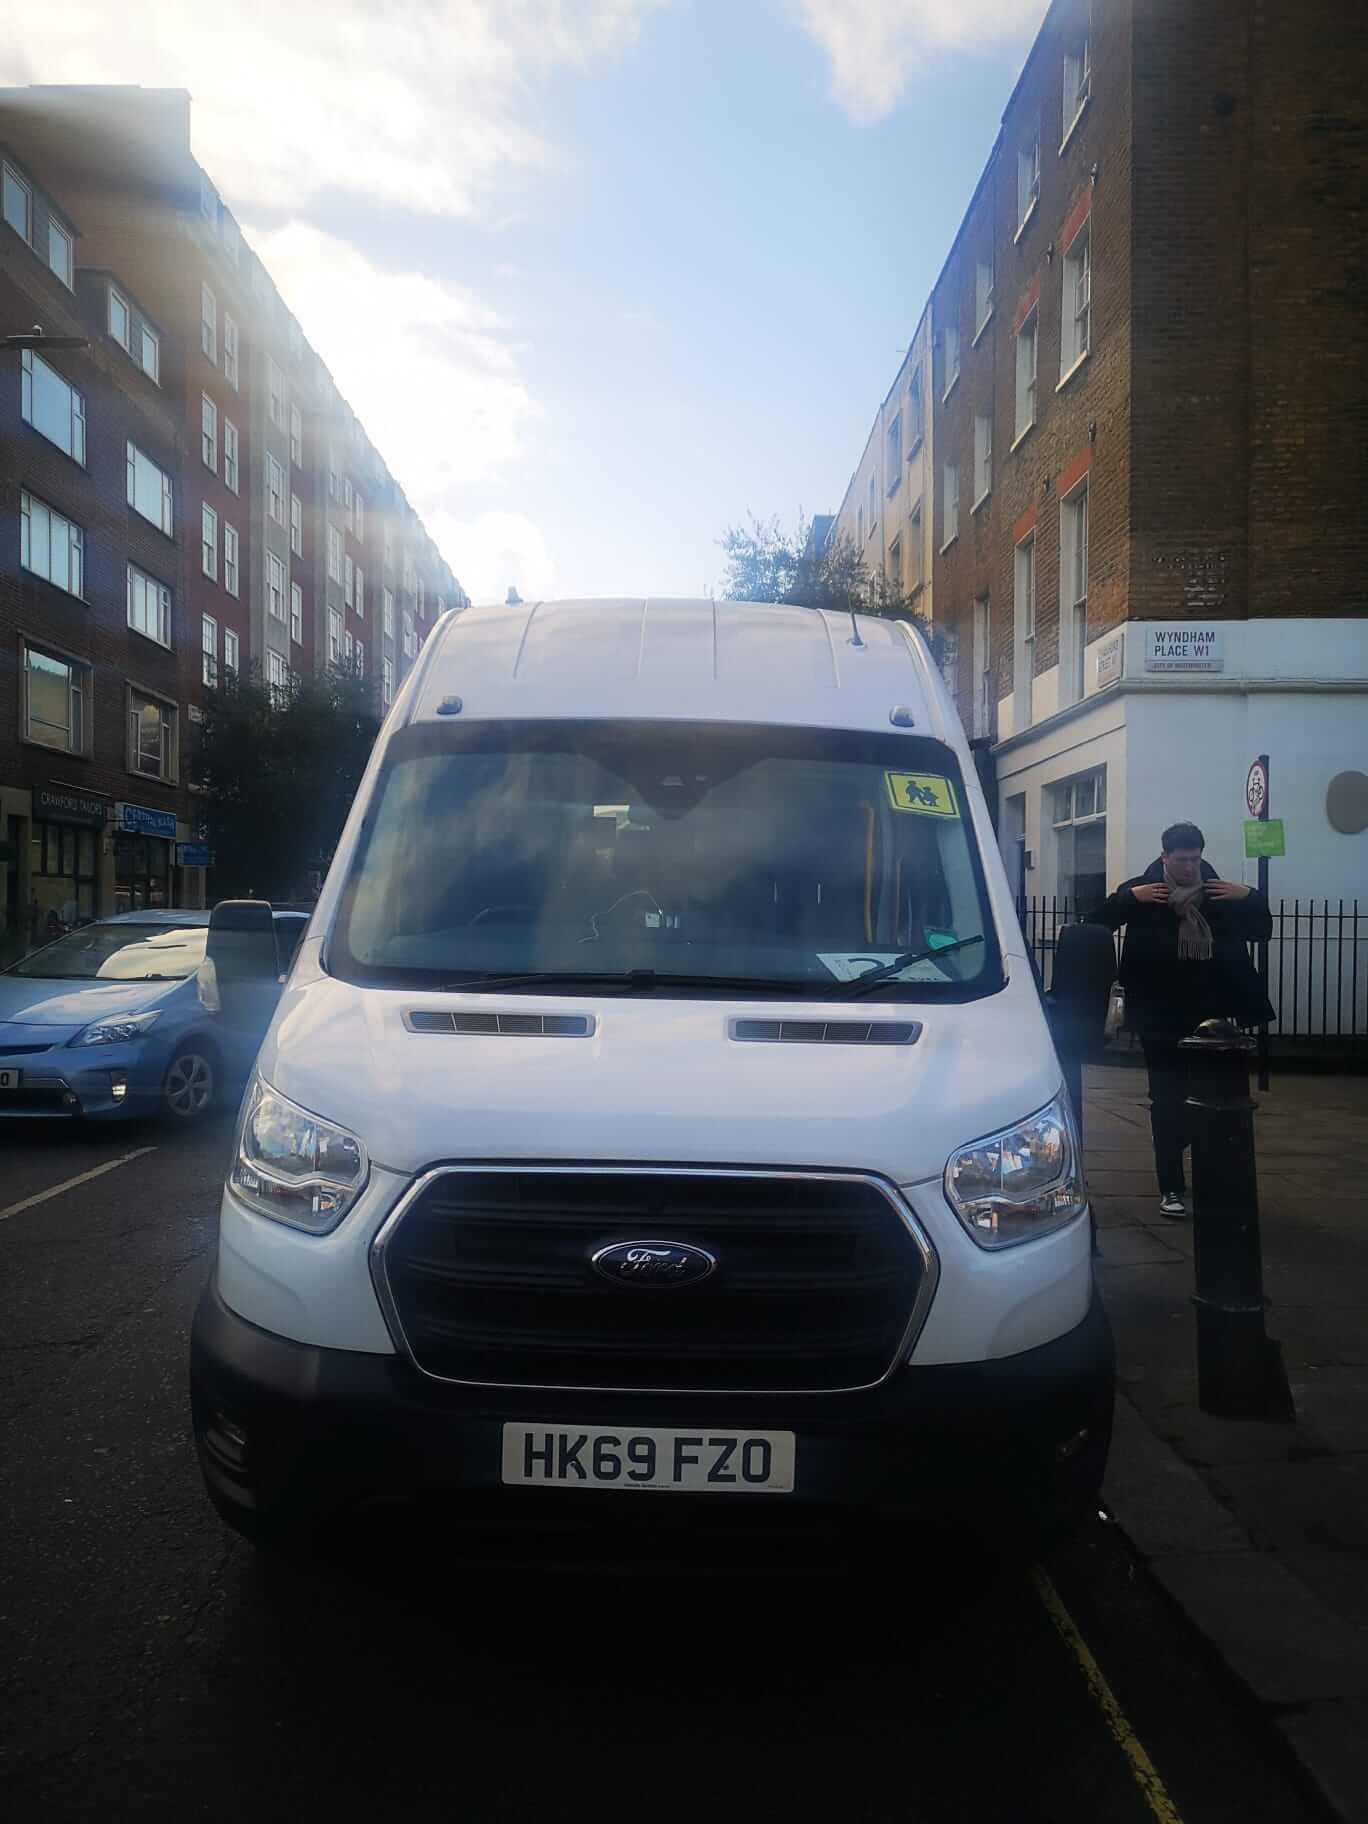 Rent a 16 seater Minibus  (Ford Transit 2019) from George Regal Travel from London 